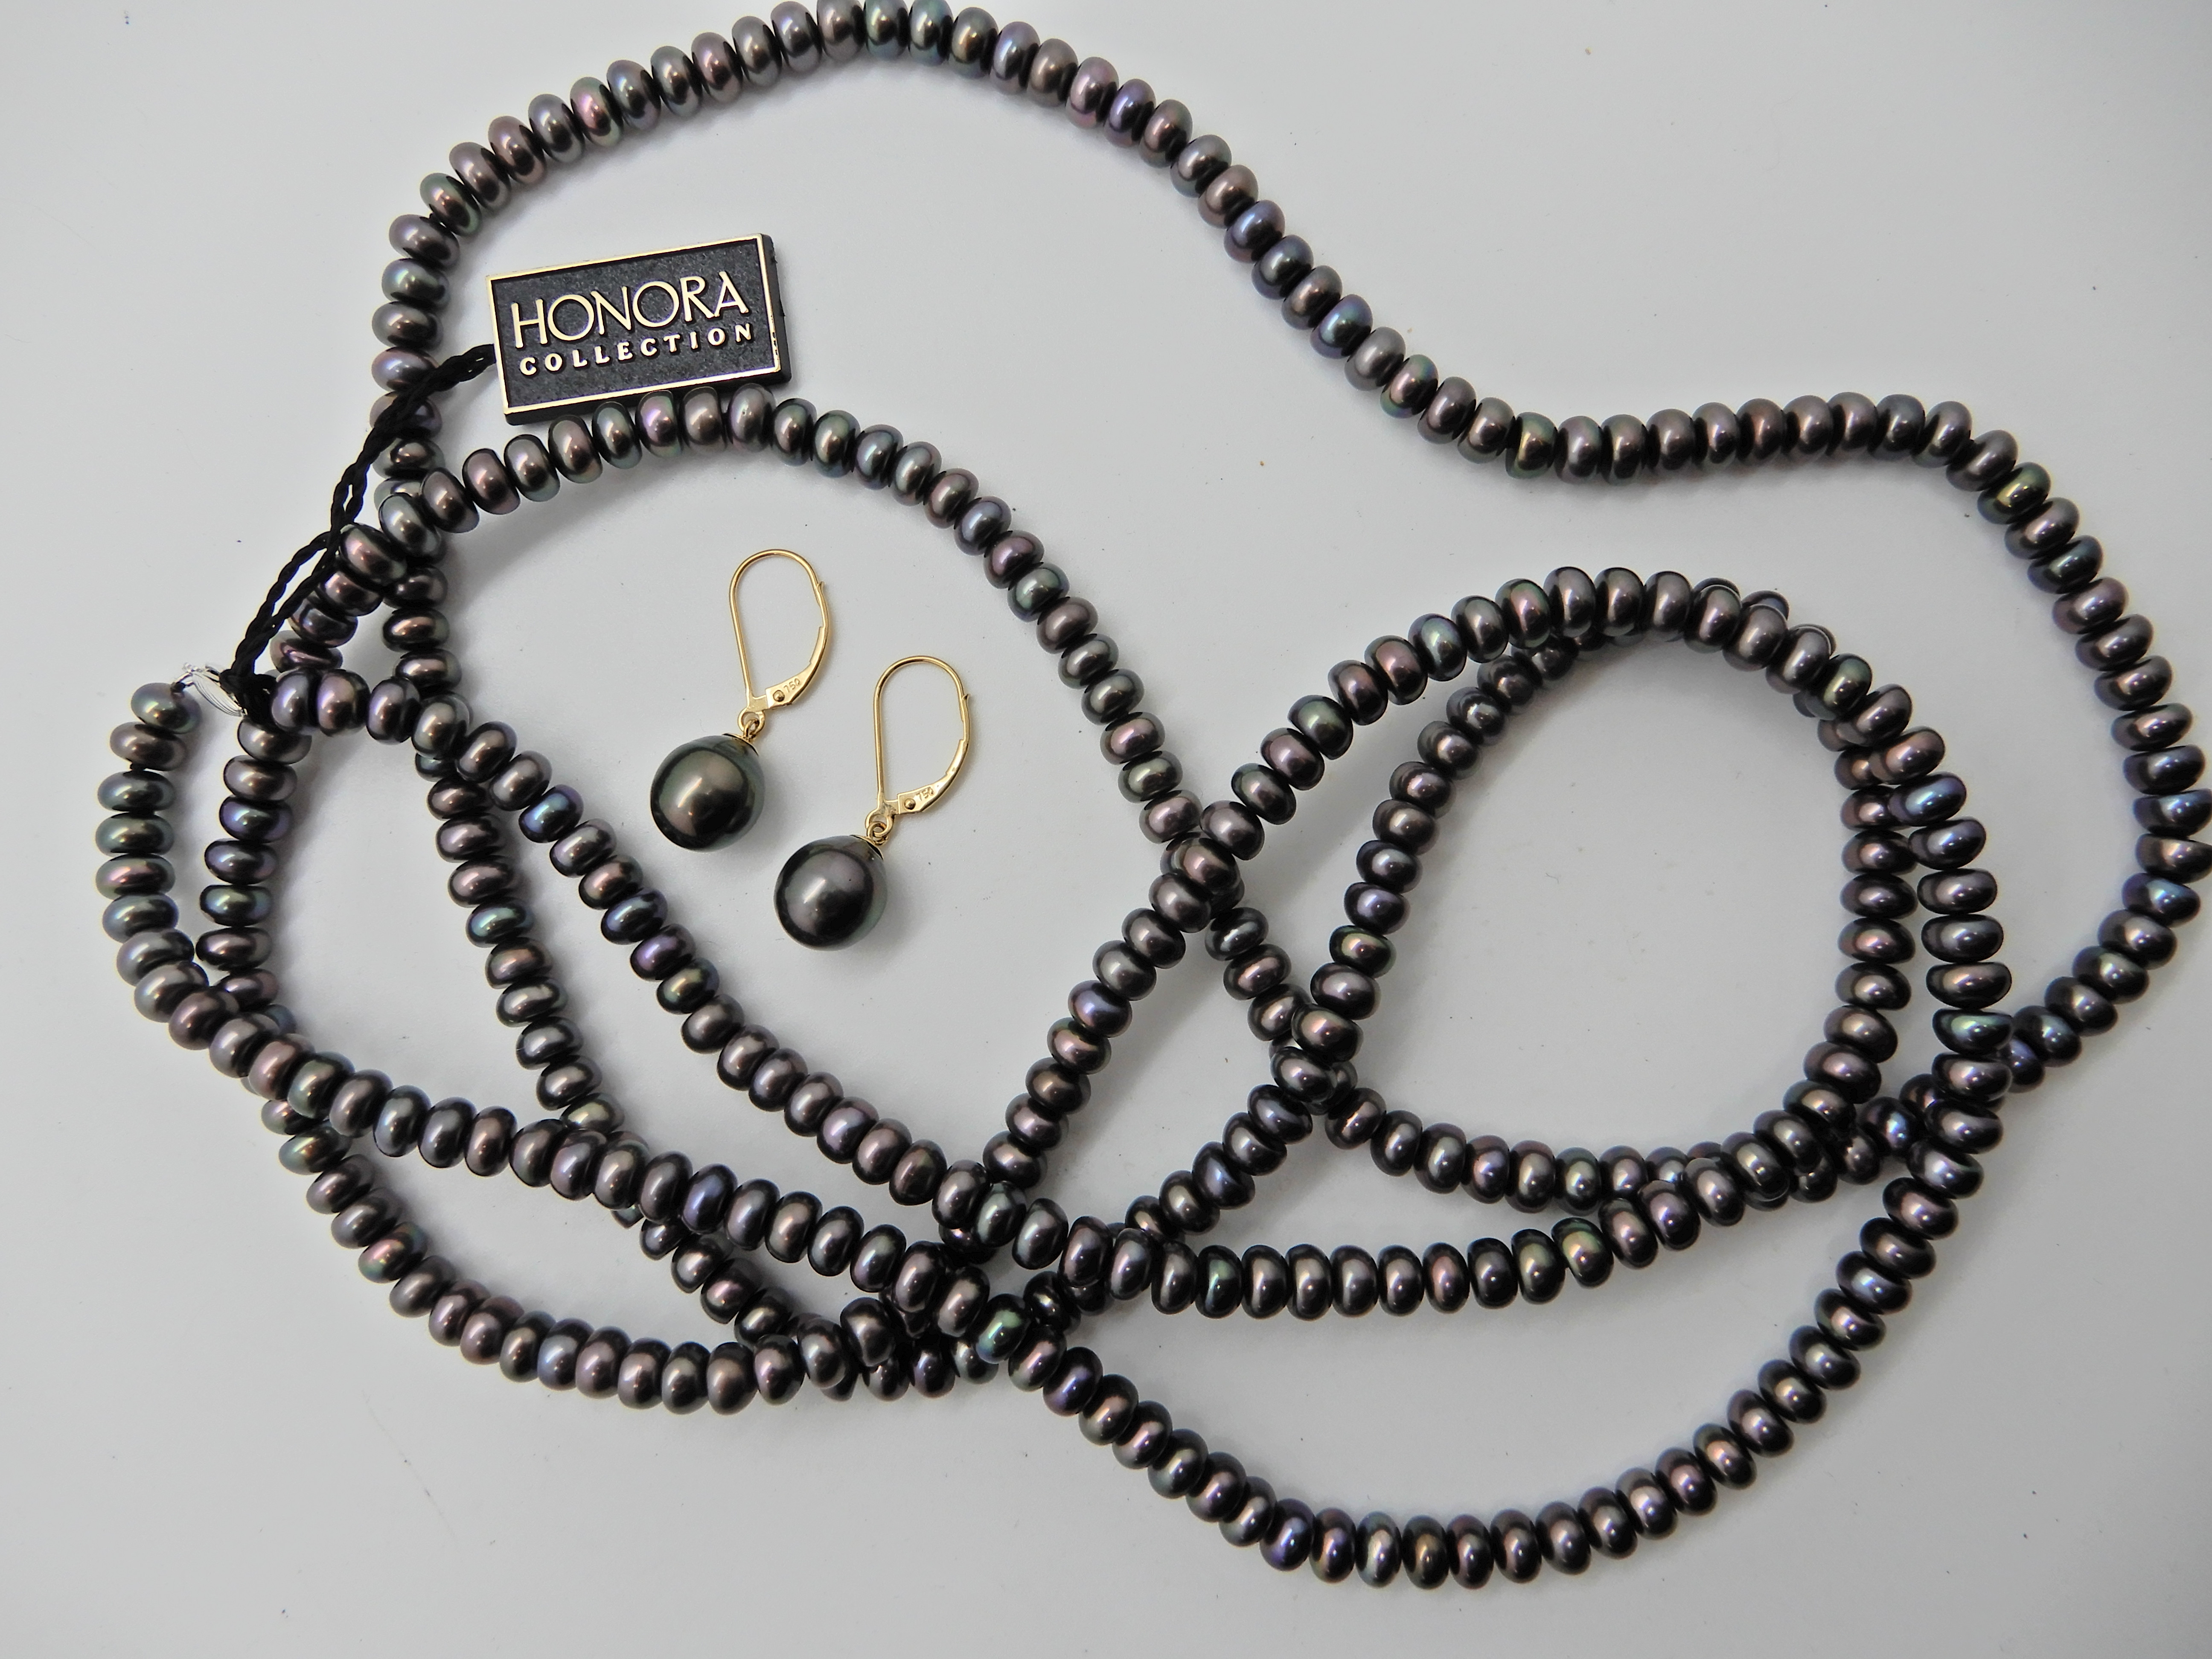 A long string of Honora black pearls with 14k gold clasp and 18ct gold mounted black pearl